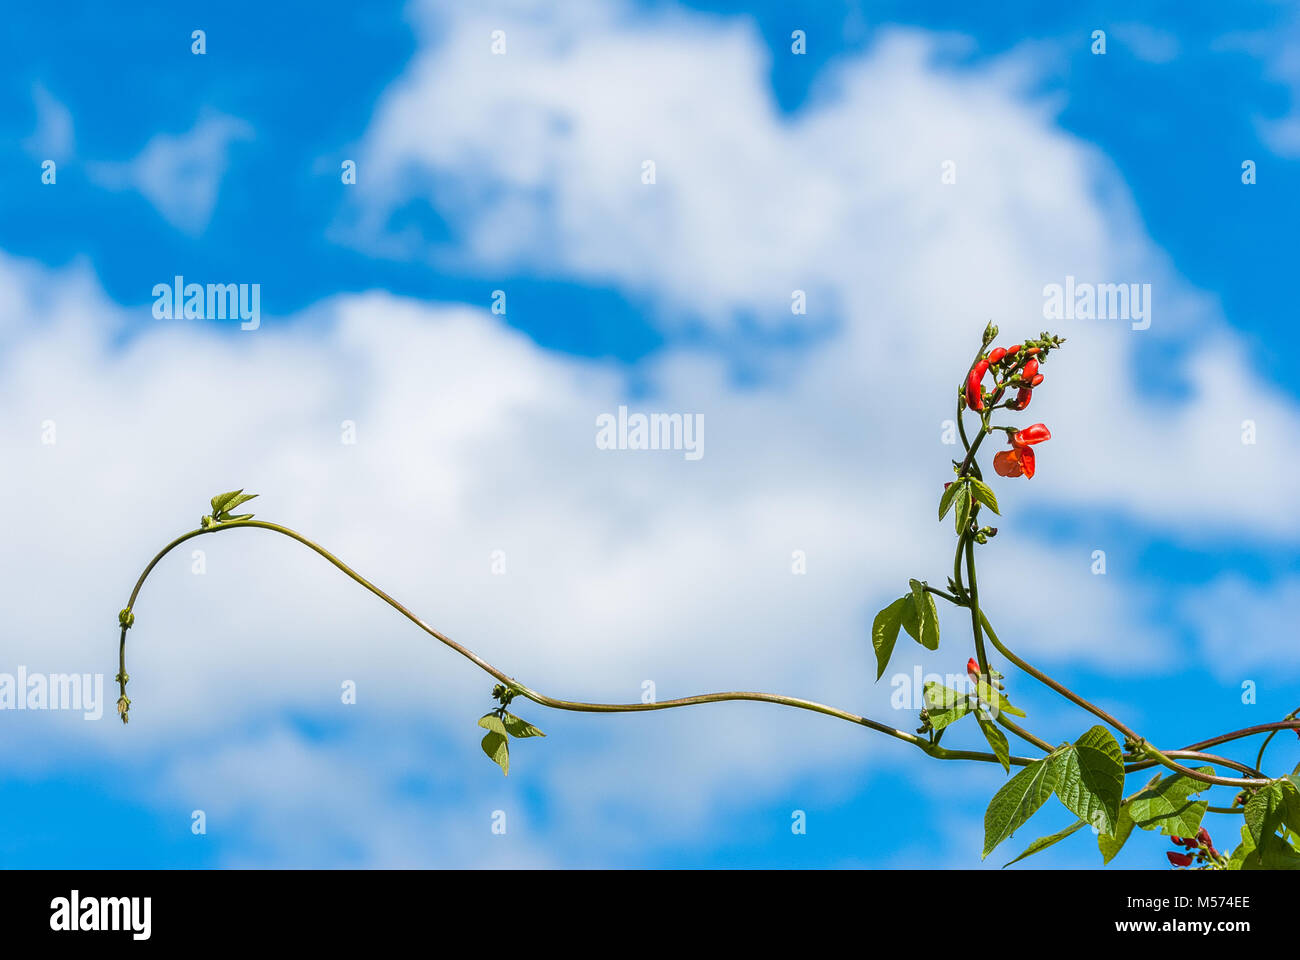 Growing Runner Bean Stalk with developing flowers against a blue sky. Stock Photo